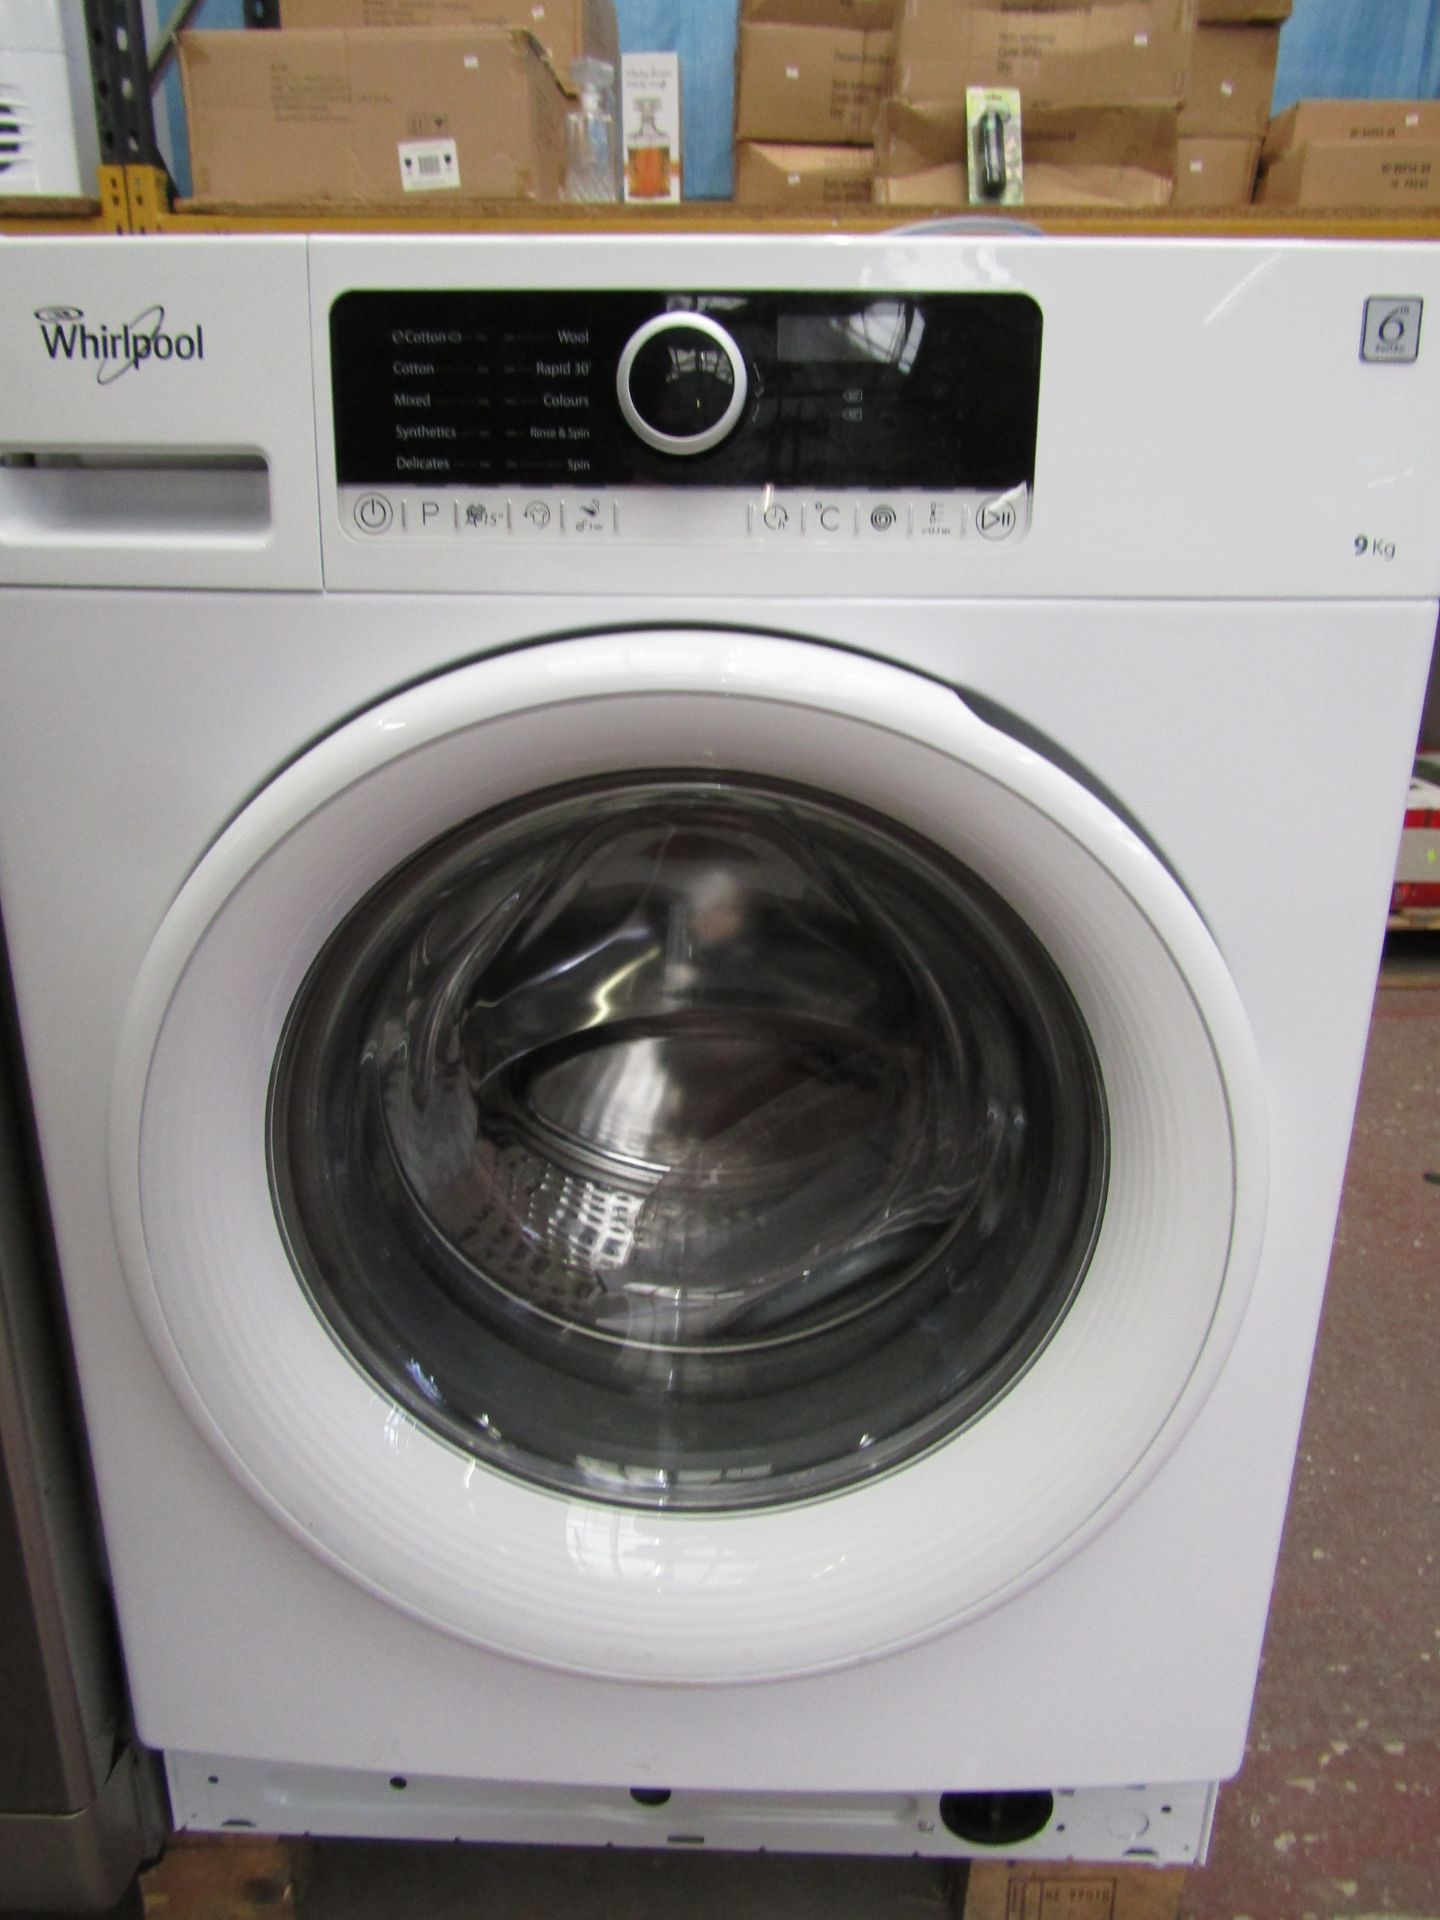 Whirlpool 6th sense 9kg washing machine, powers up and spins